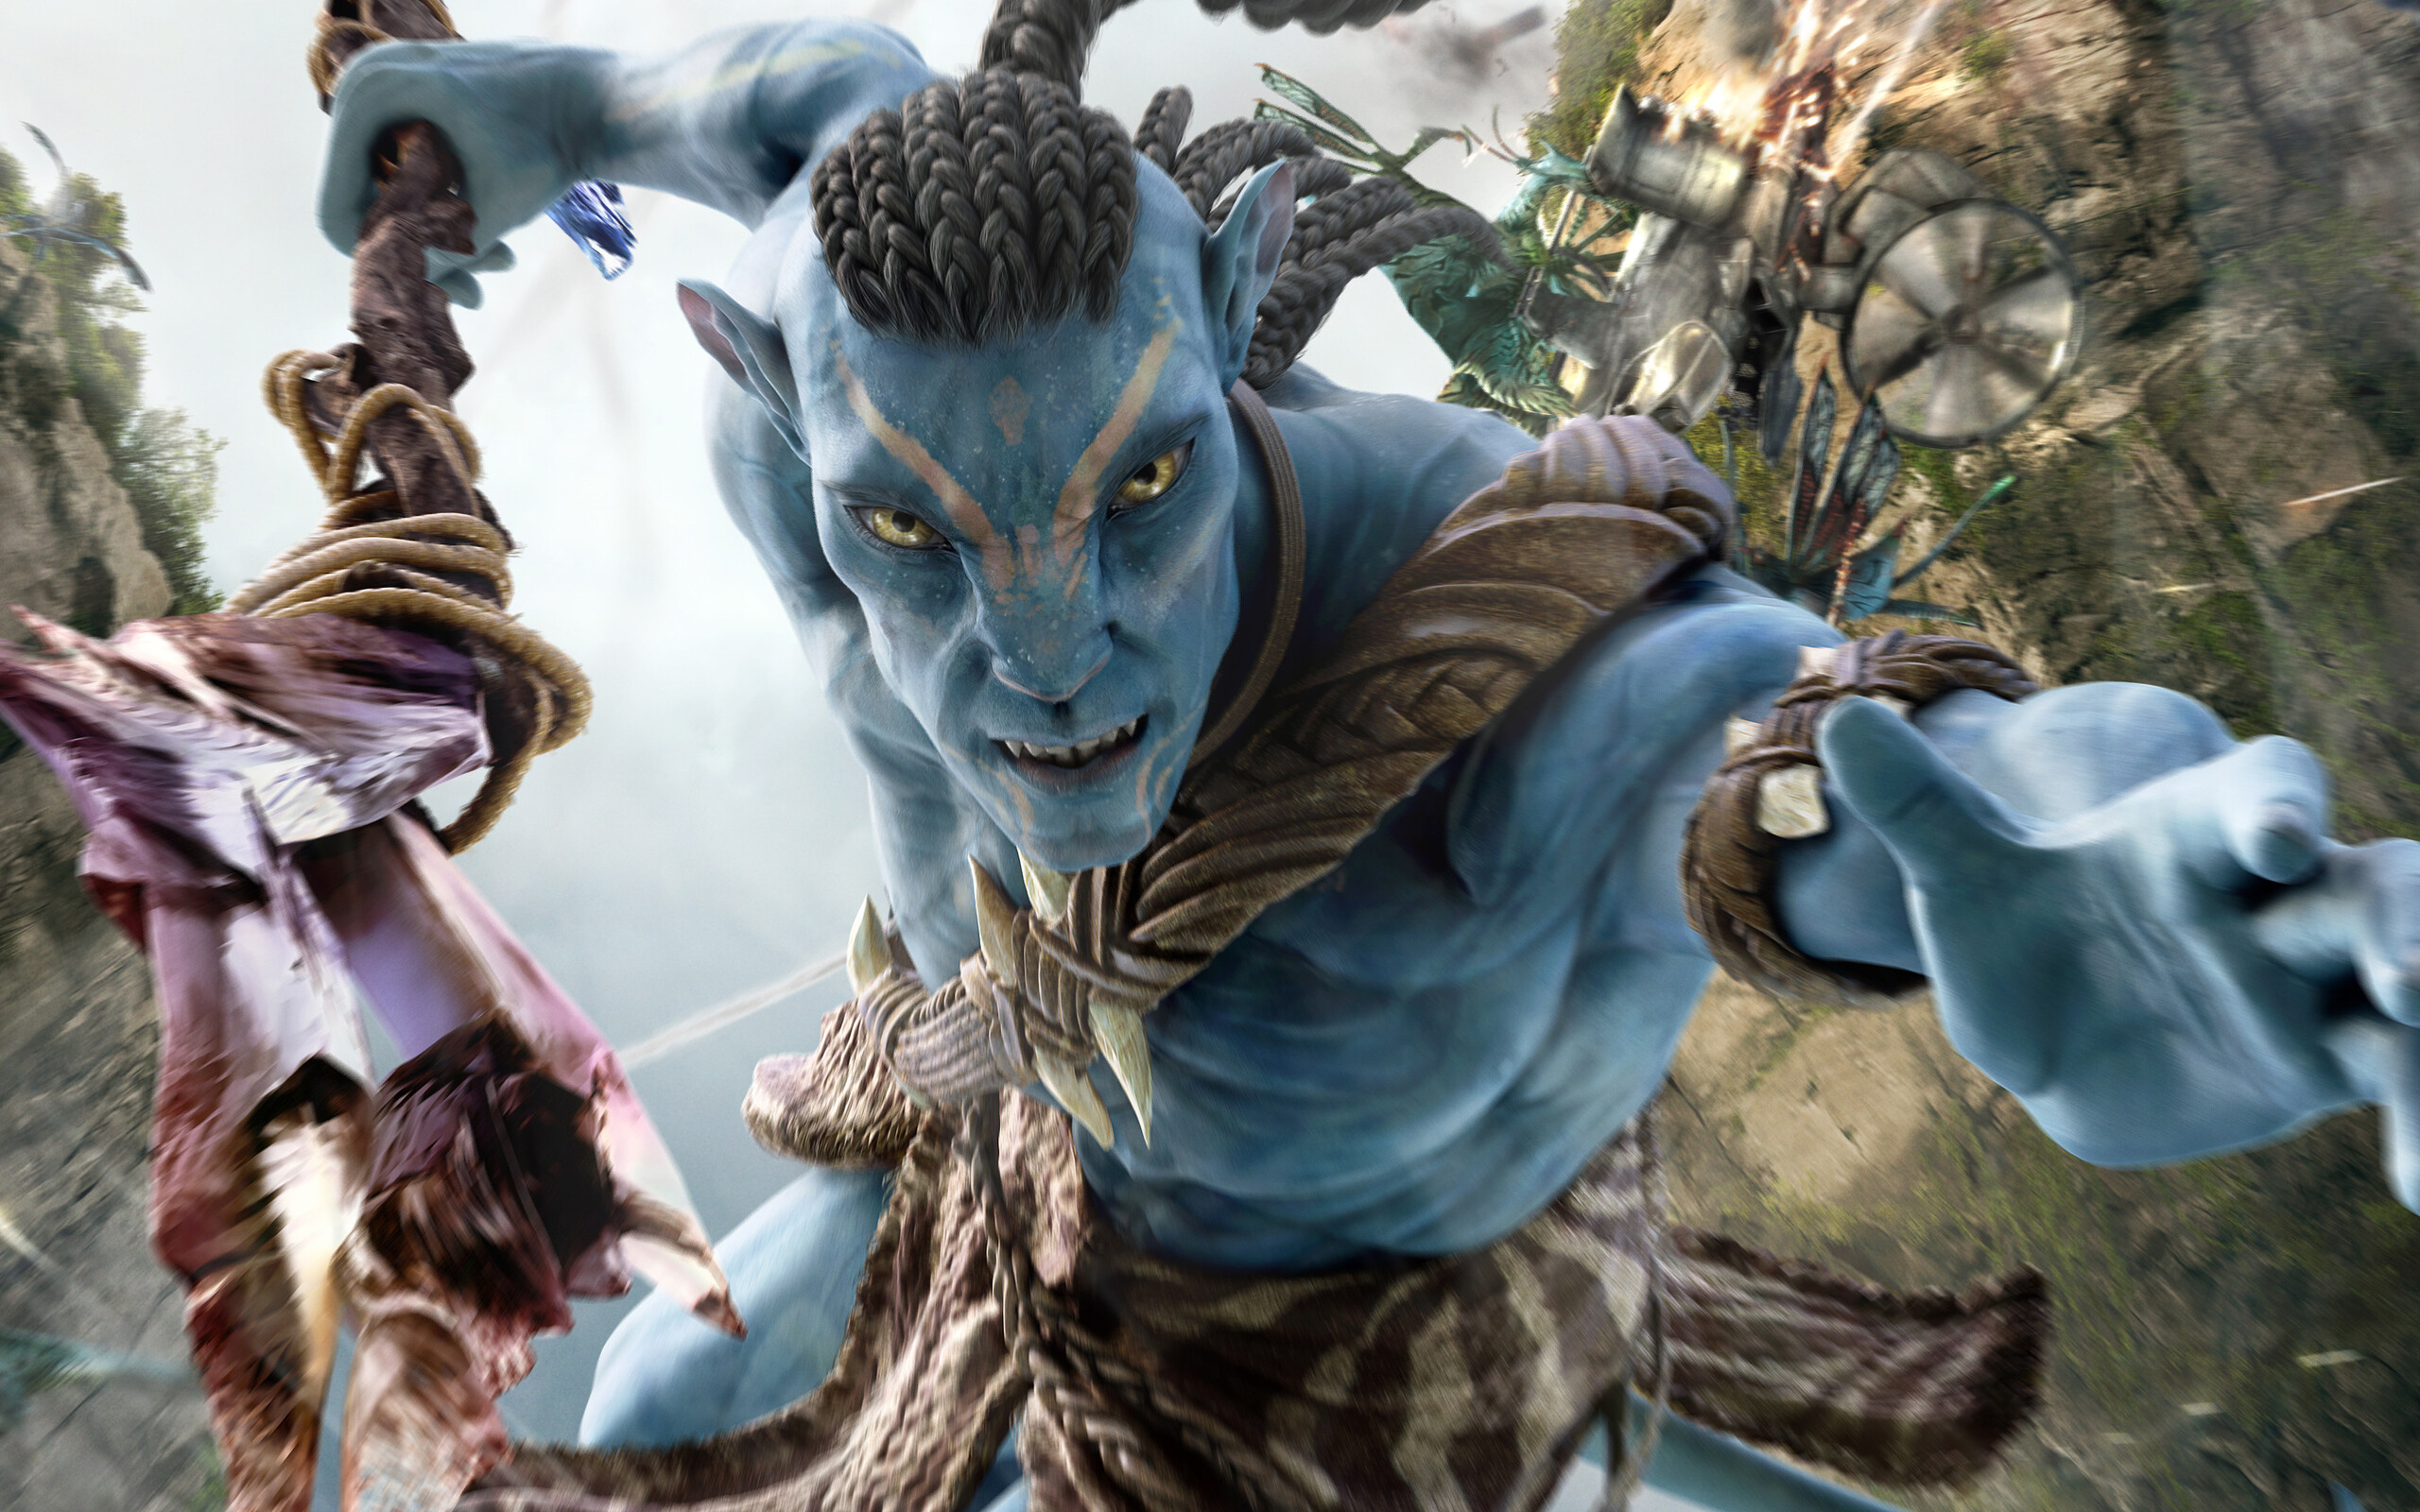 Avatar: Remained the highest-grossing film in the world for nearly a decade until it was overtaken by Avengers: Endgame in 2019. 2560x1600 HD Wallpaper.